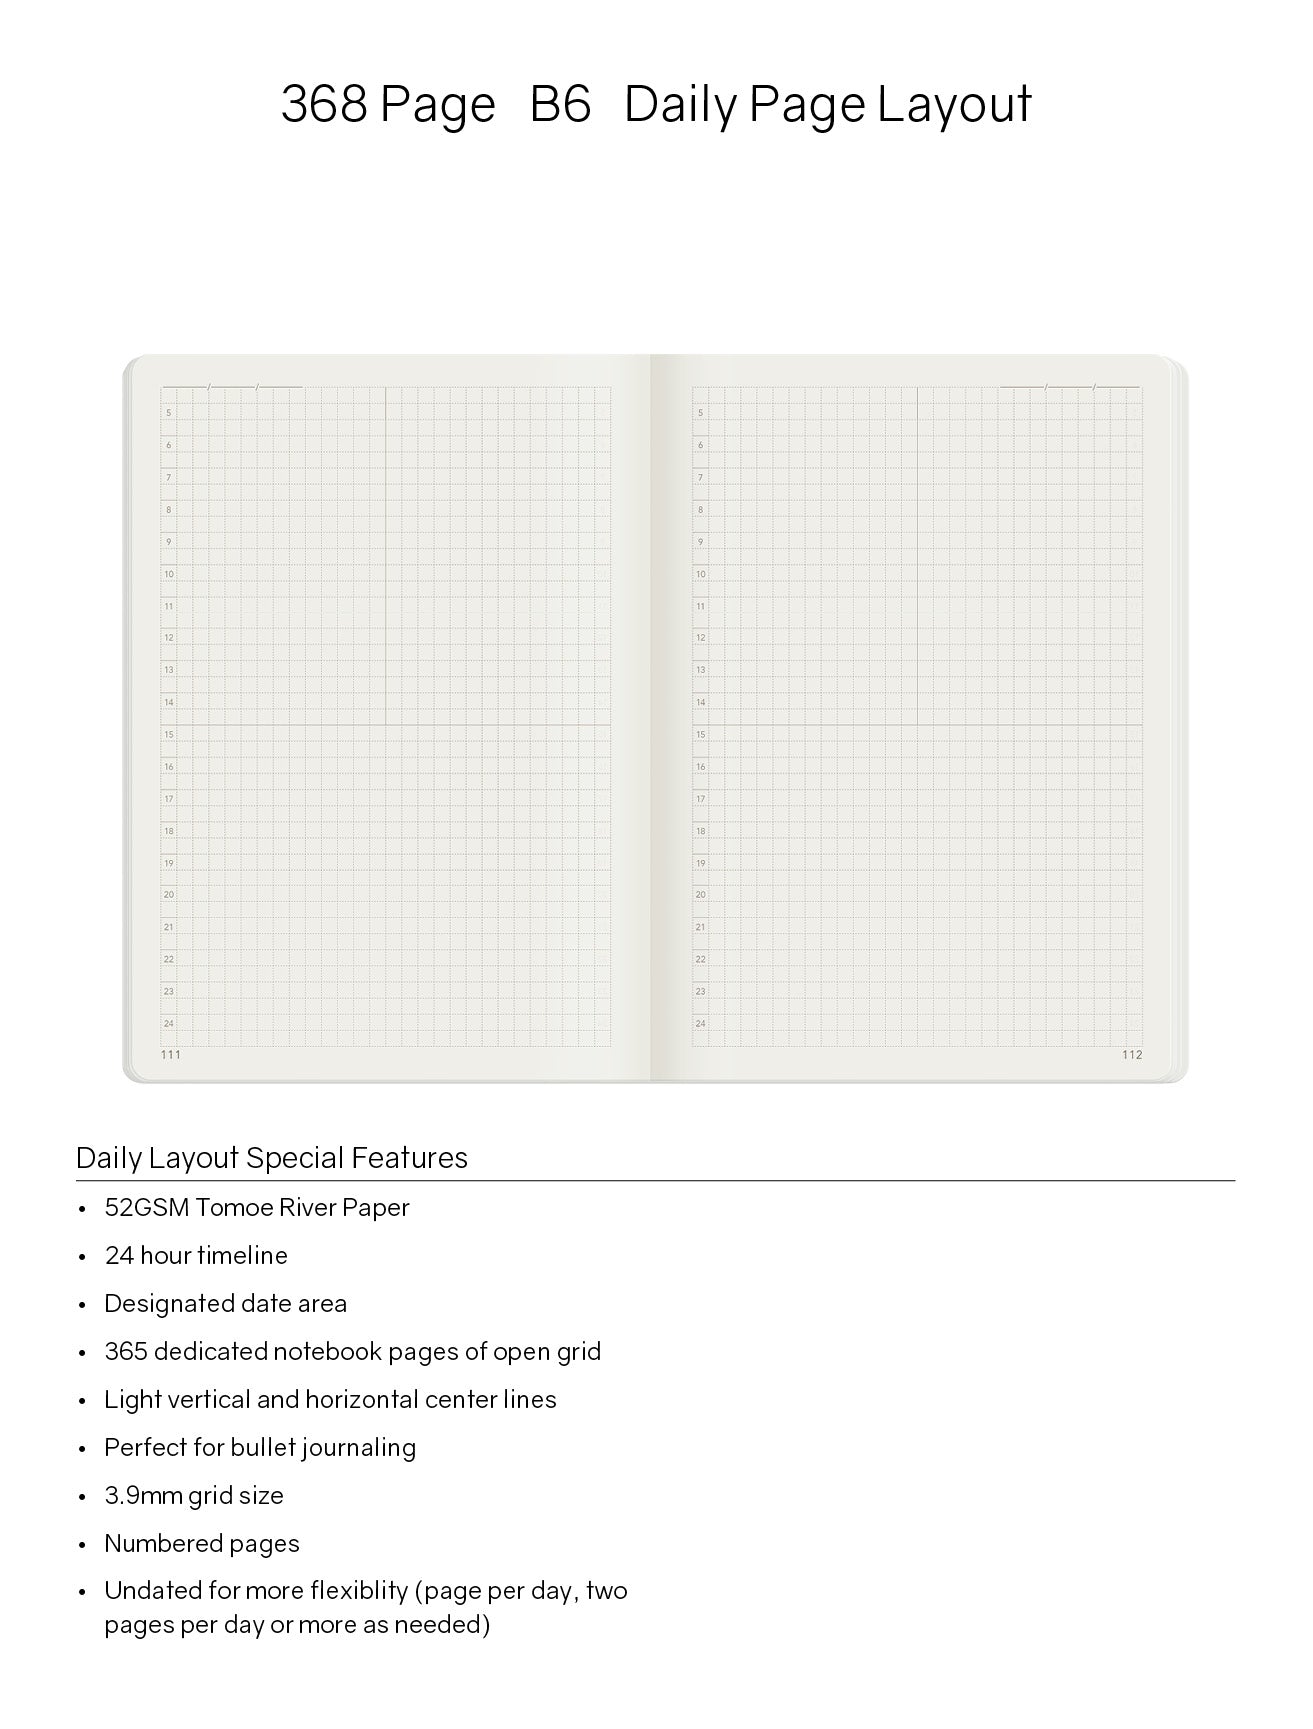 B6 Notebook Pumice (Cream) (368 pages) Tomoe River